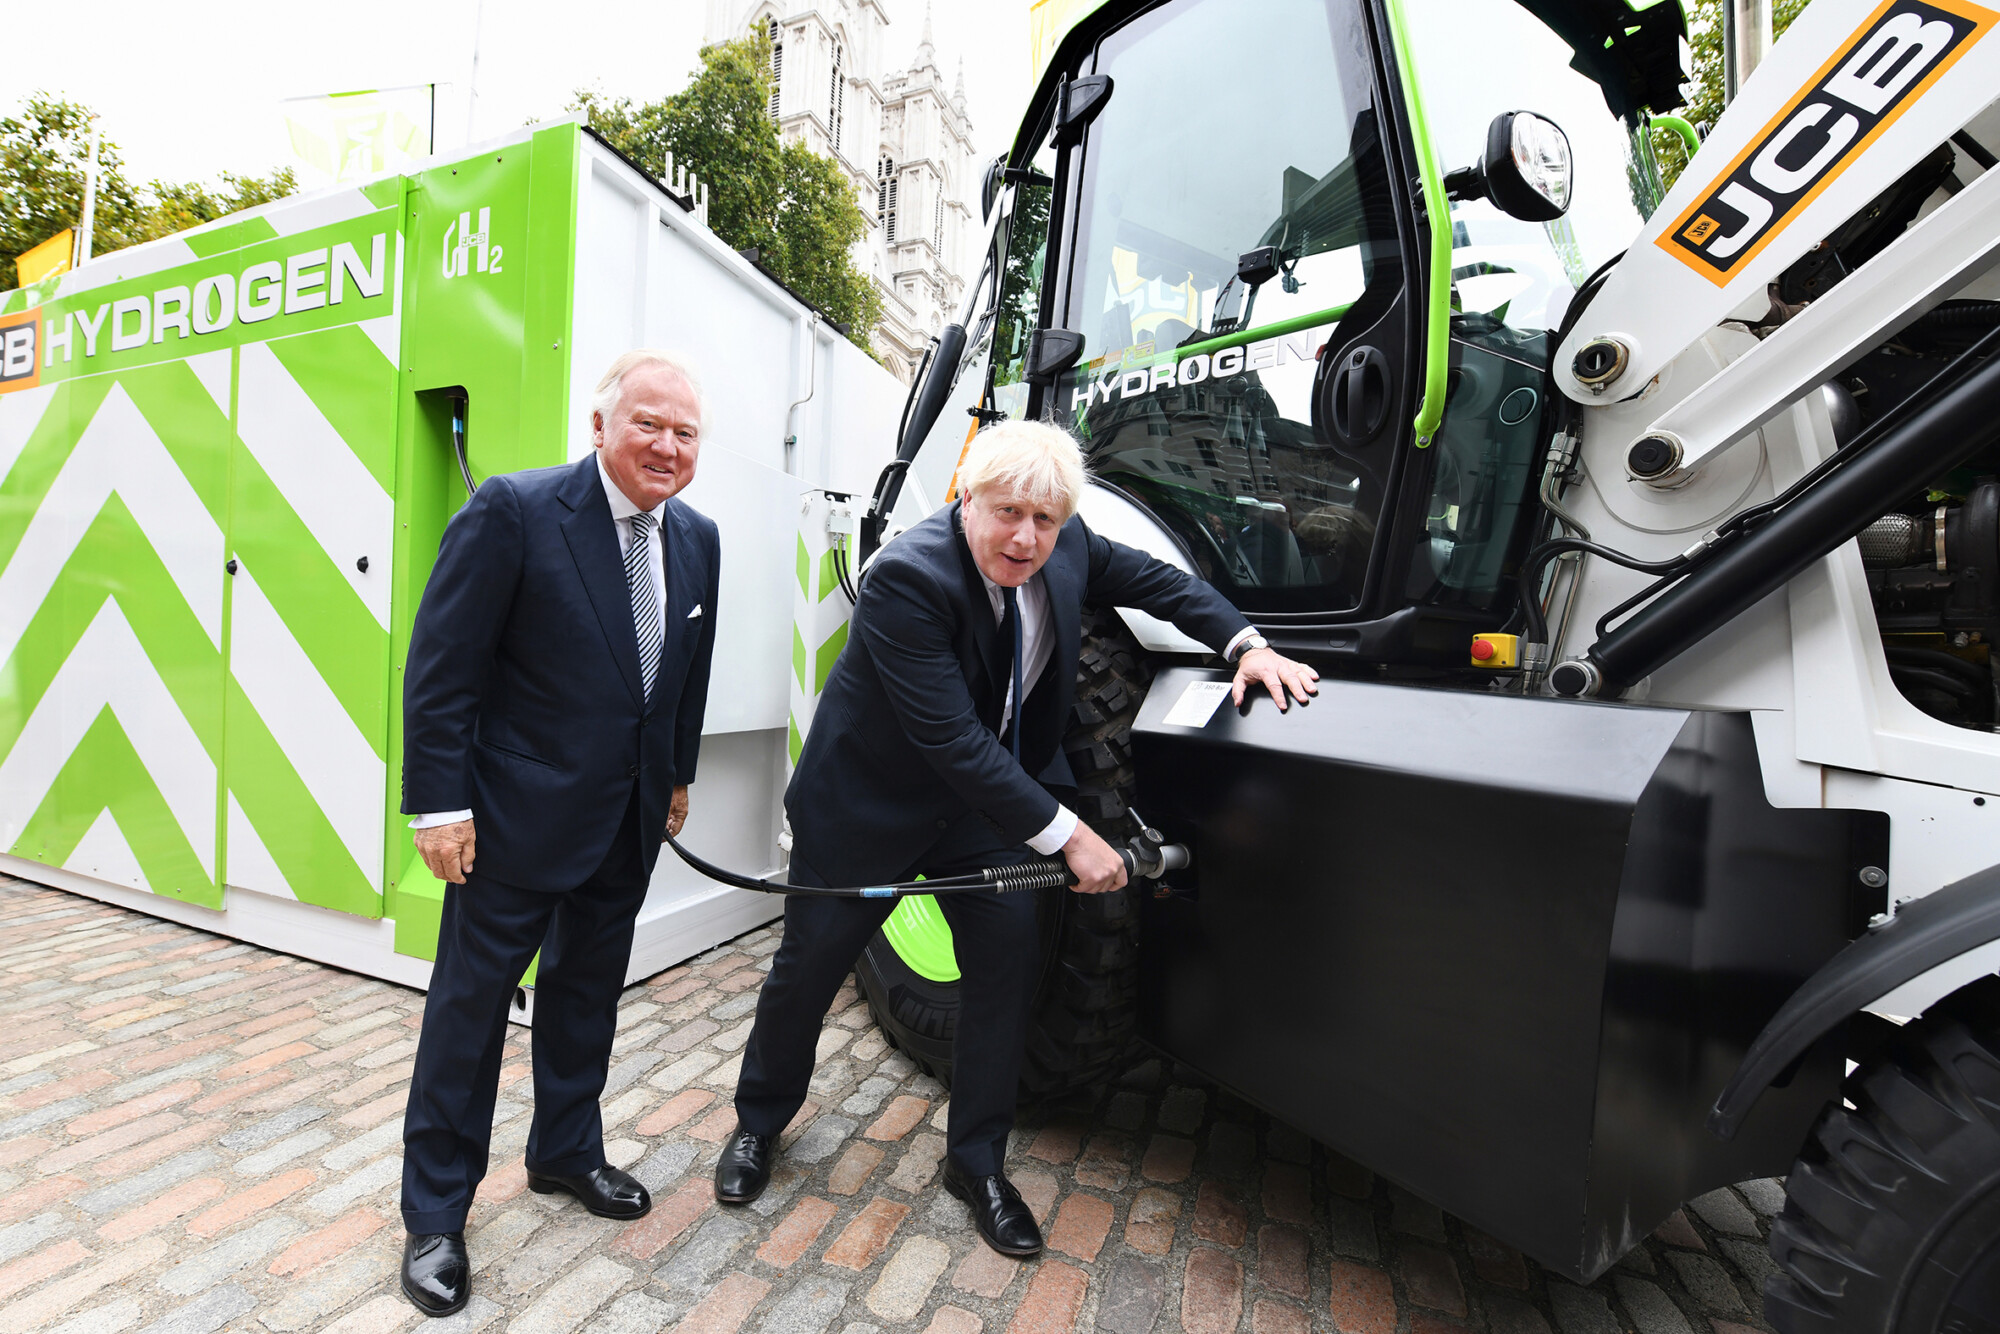 JCB hydrogen powered unveiling with Prime Minister Boris Johnson